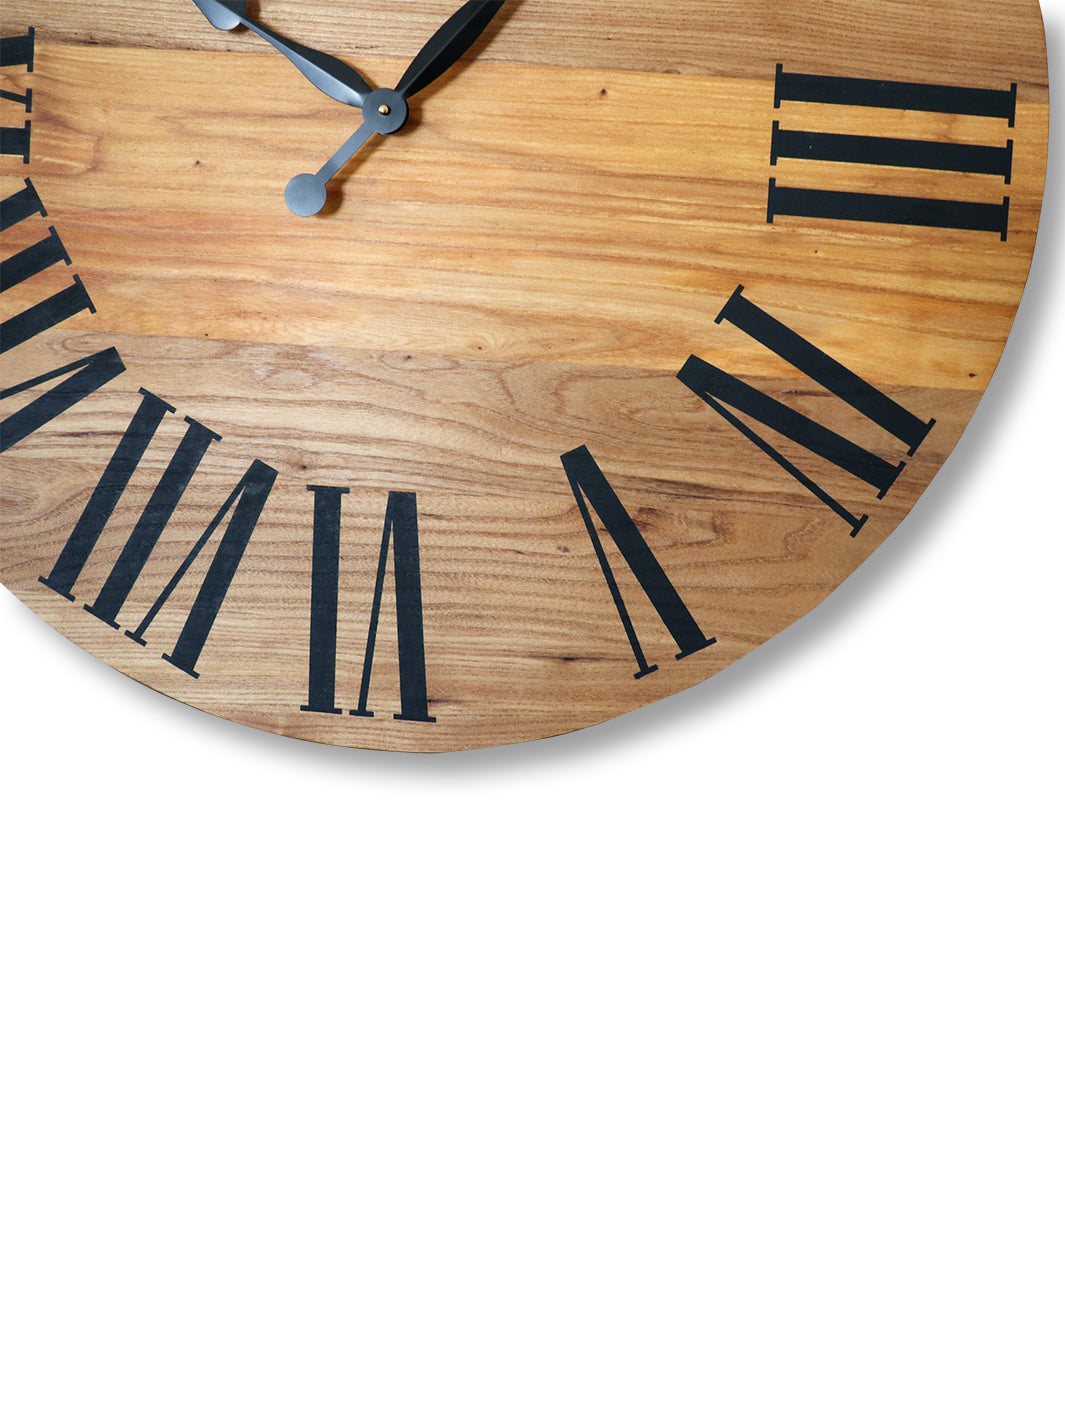 Red Elm 30" Wall Clock (in stock) Earthly Comfort Clocks 1668-1